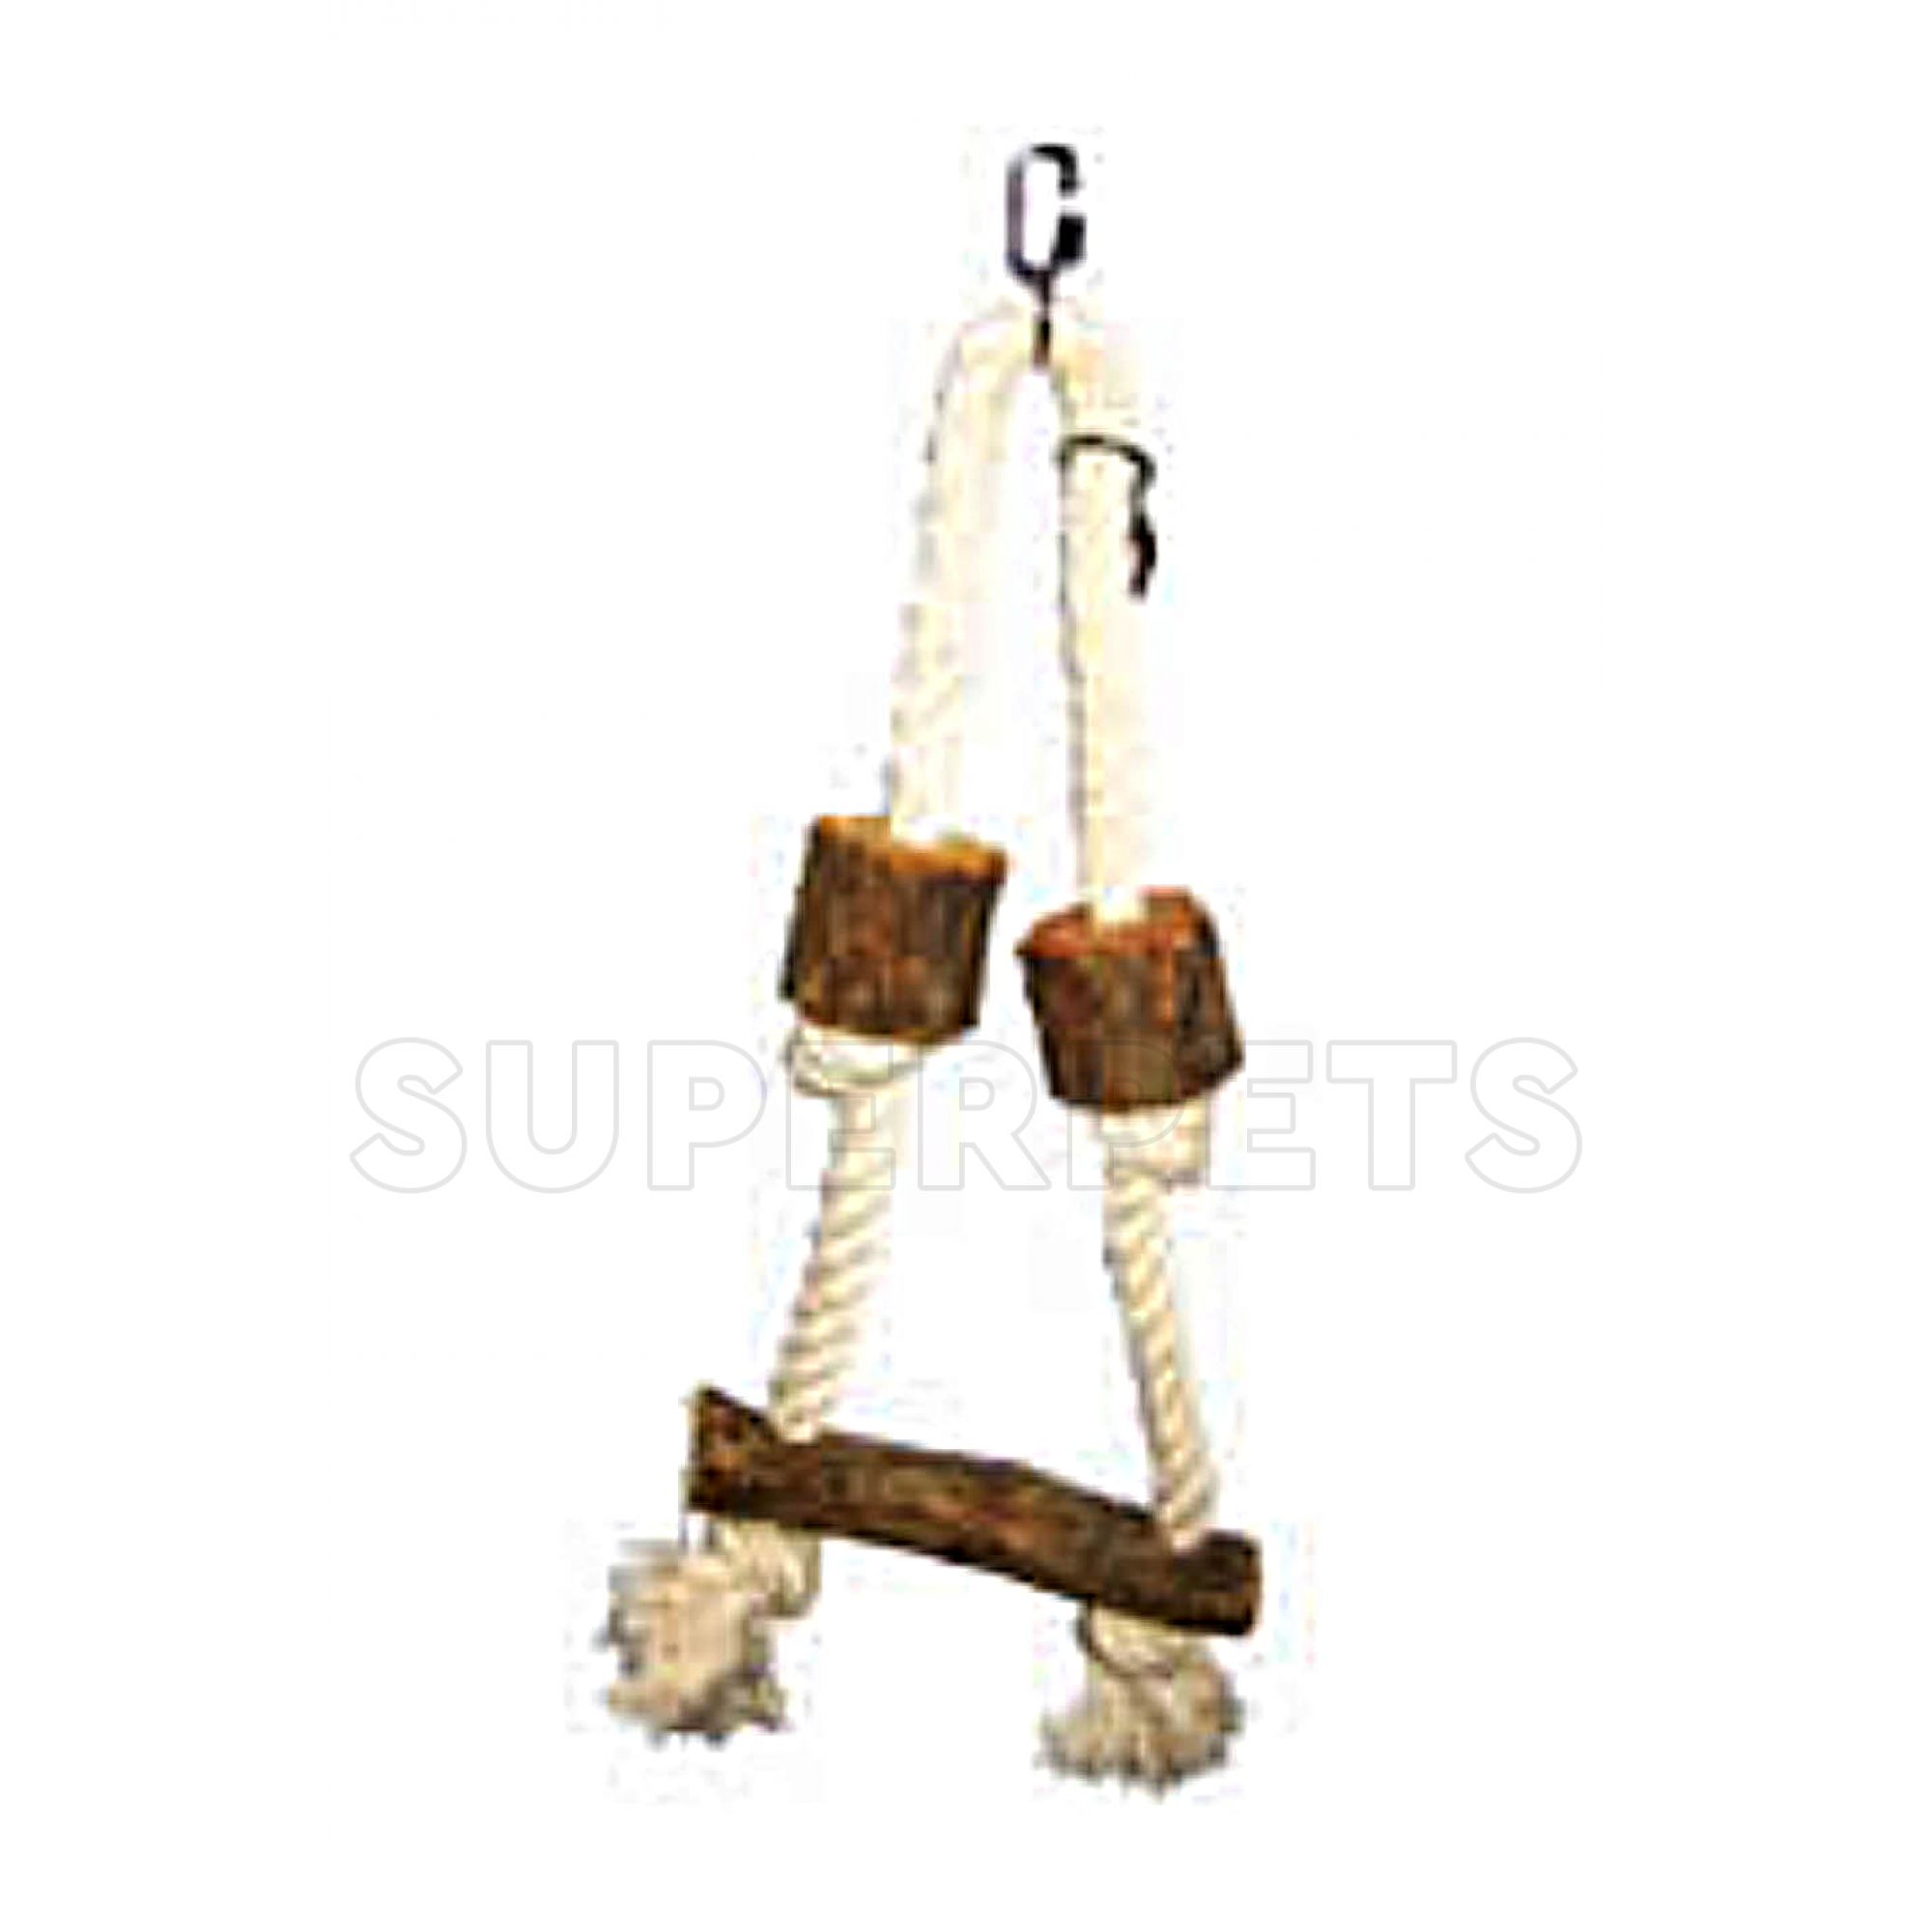 OPSP - 46308 - Bird Toy with Wooden Perch and Rope Tied 40x17x5cm